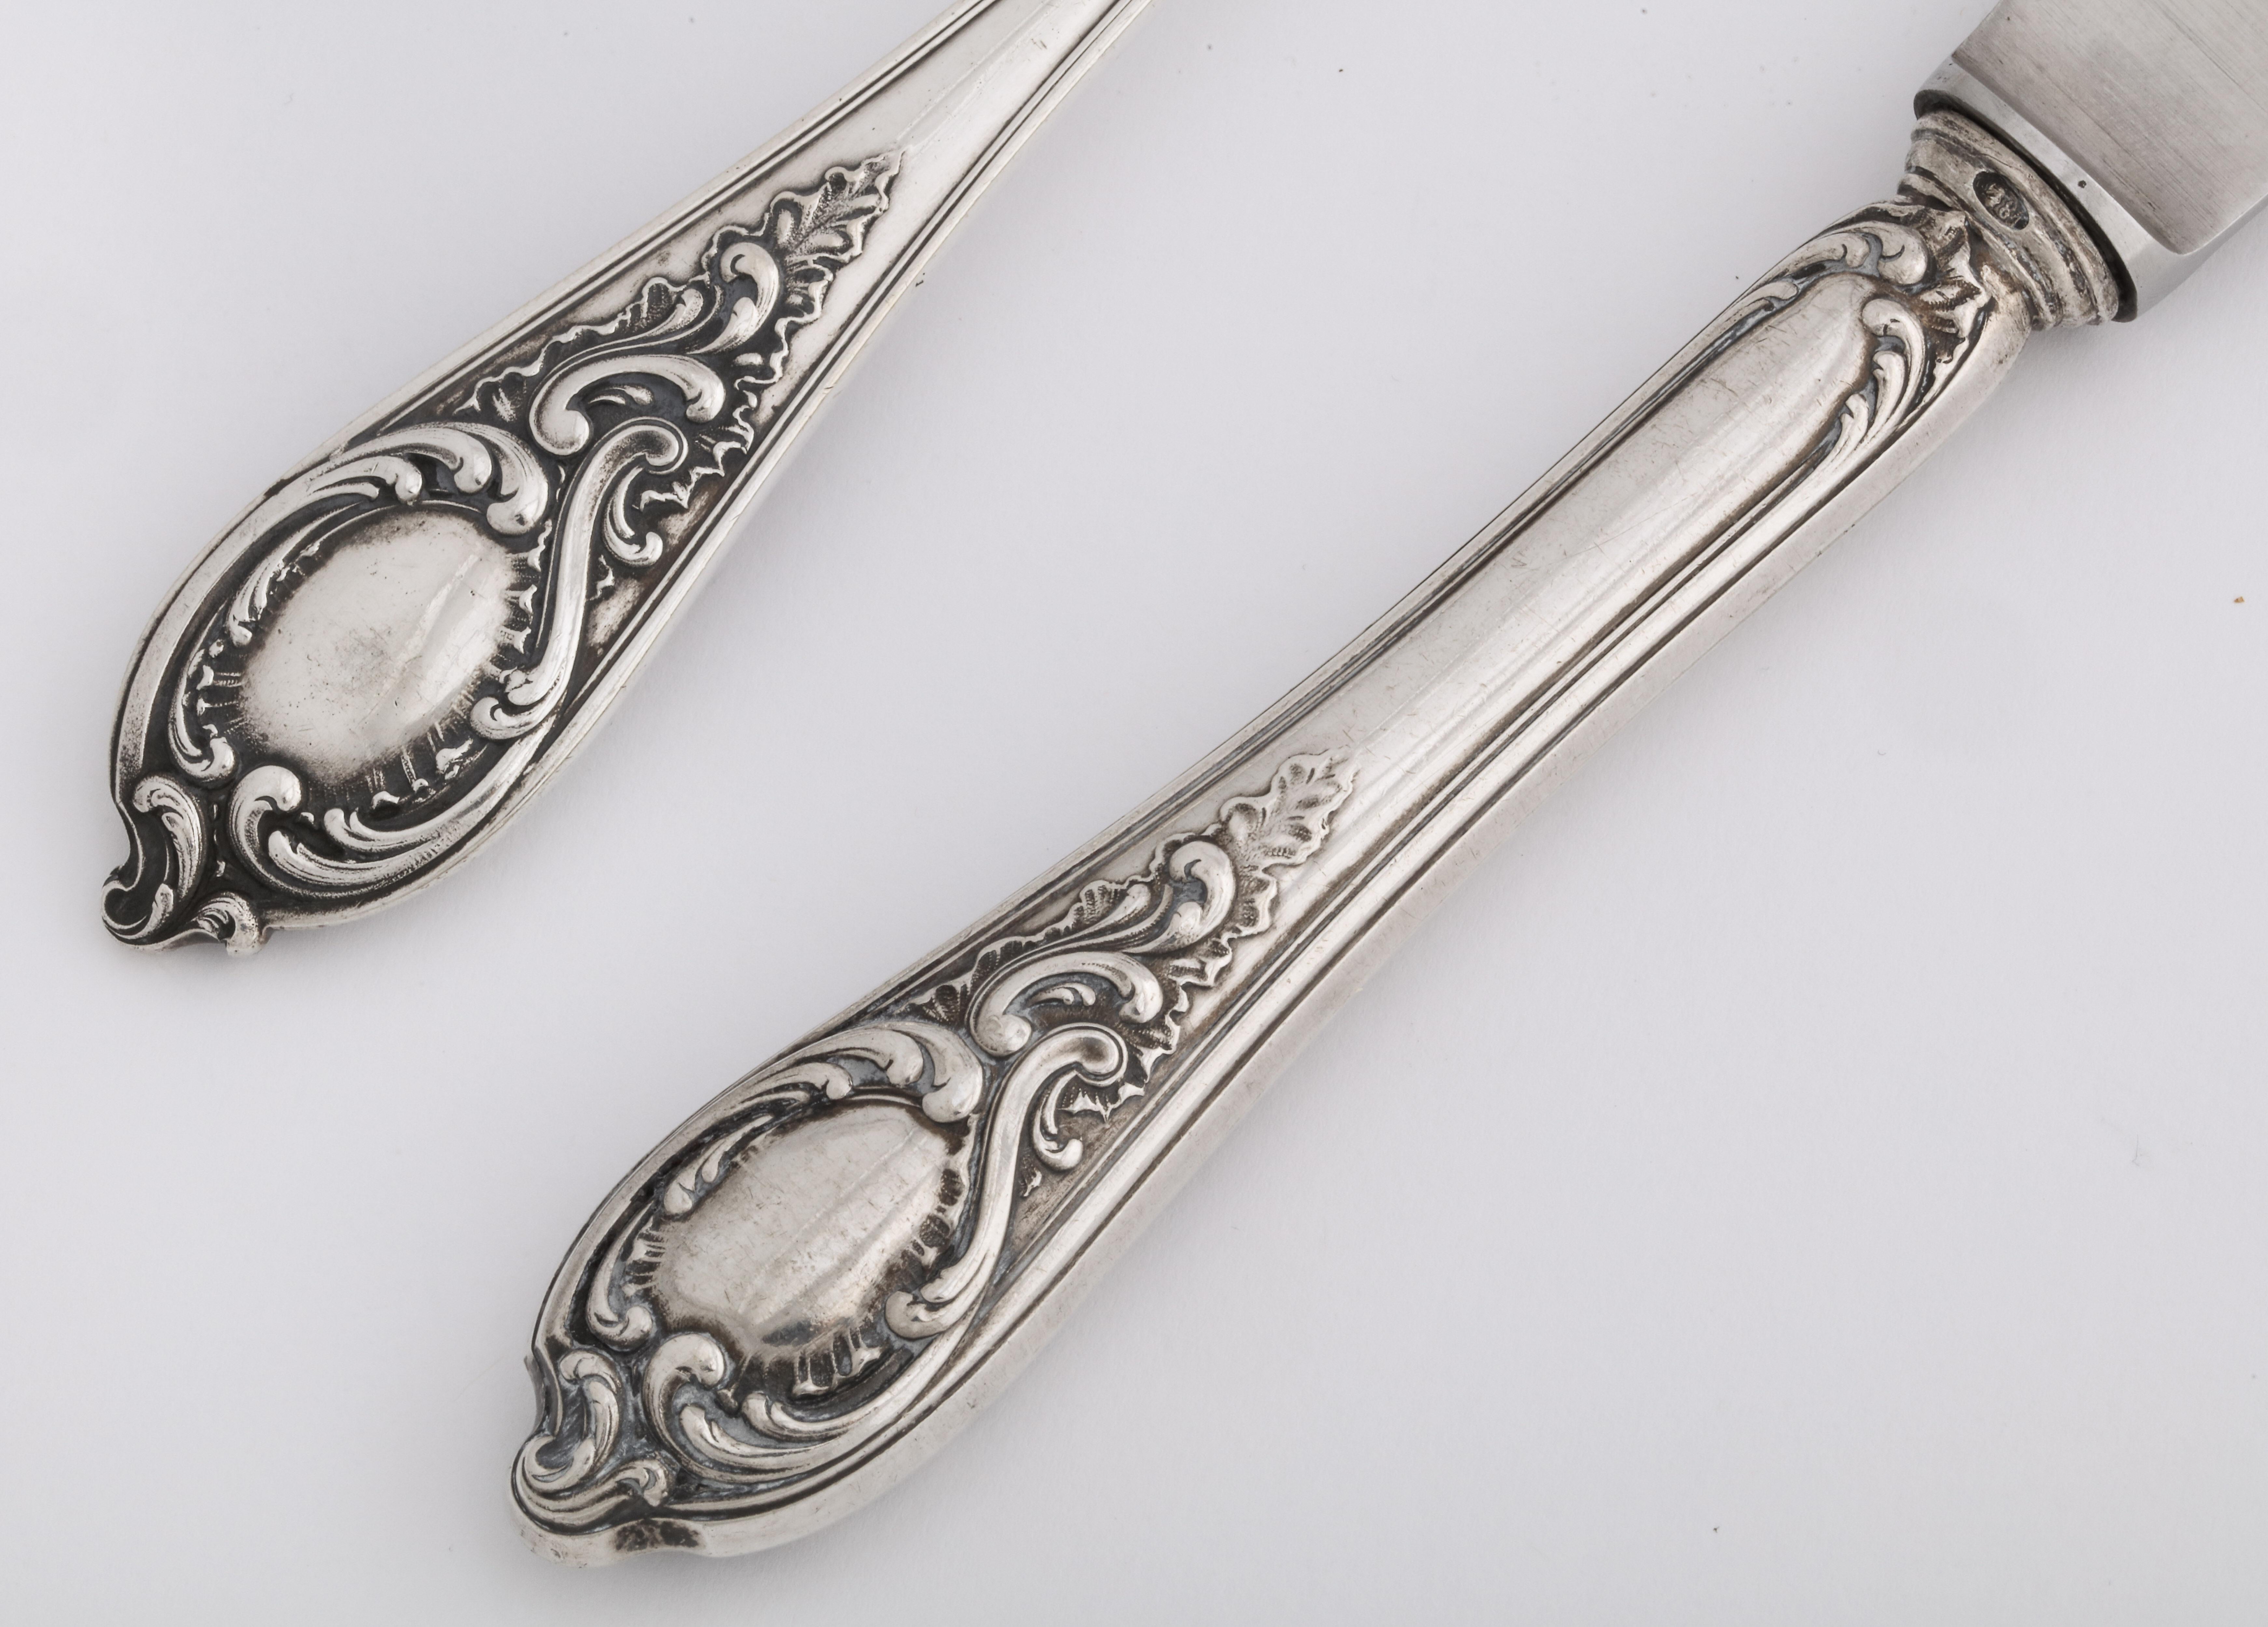 Russian Imperial-Era Fabergé Silver Dinner Knife and Fork, Moscow, Circa 1900 For Sale 4